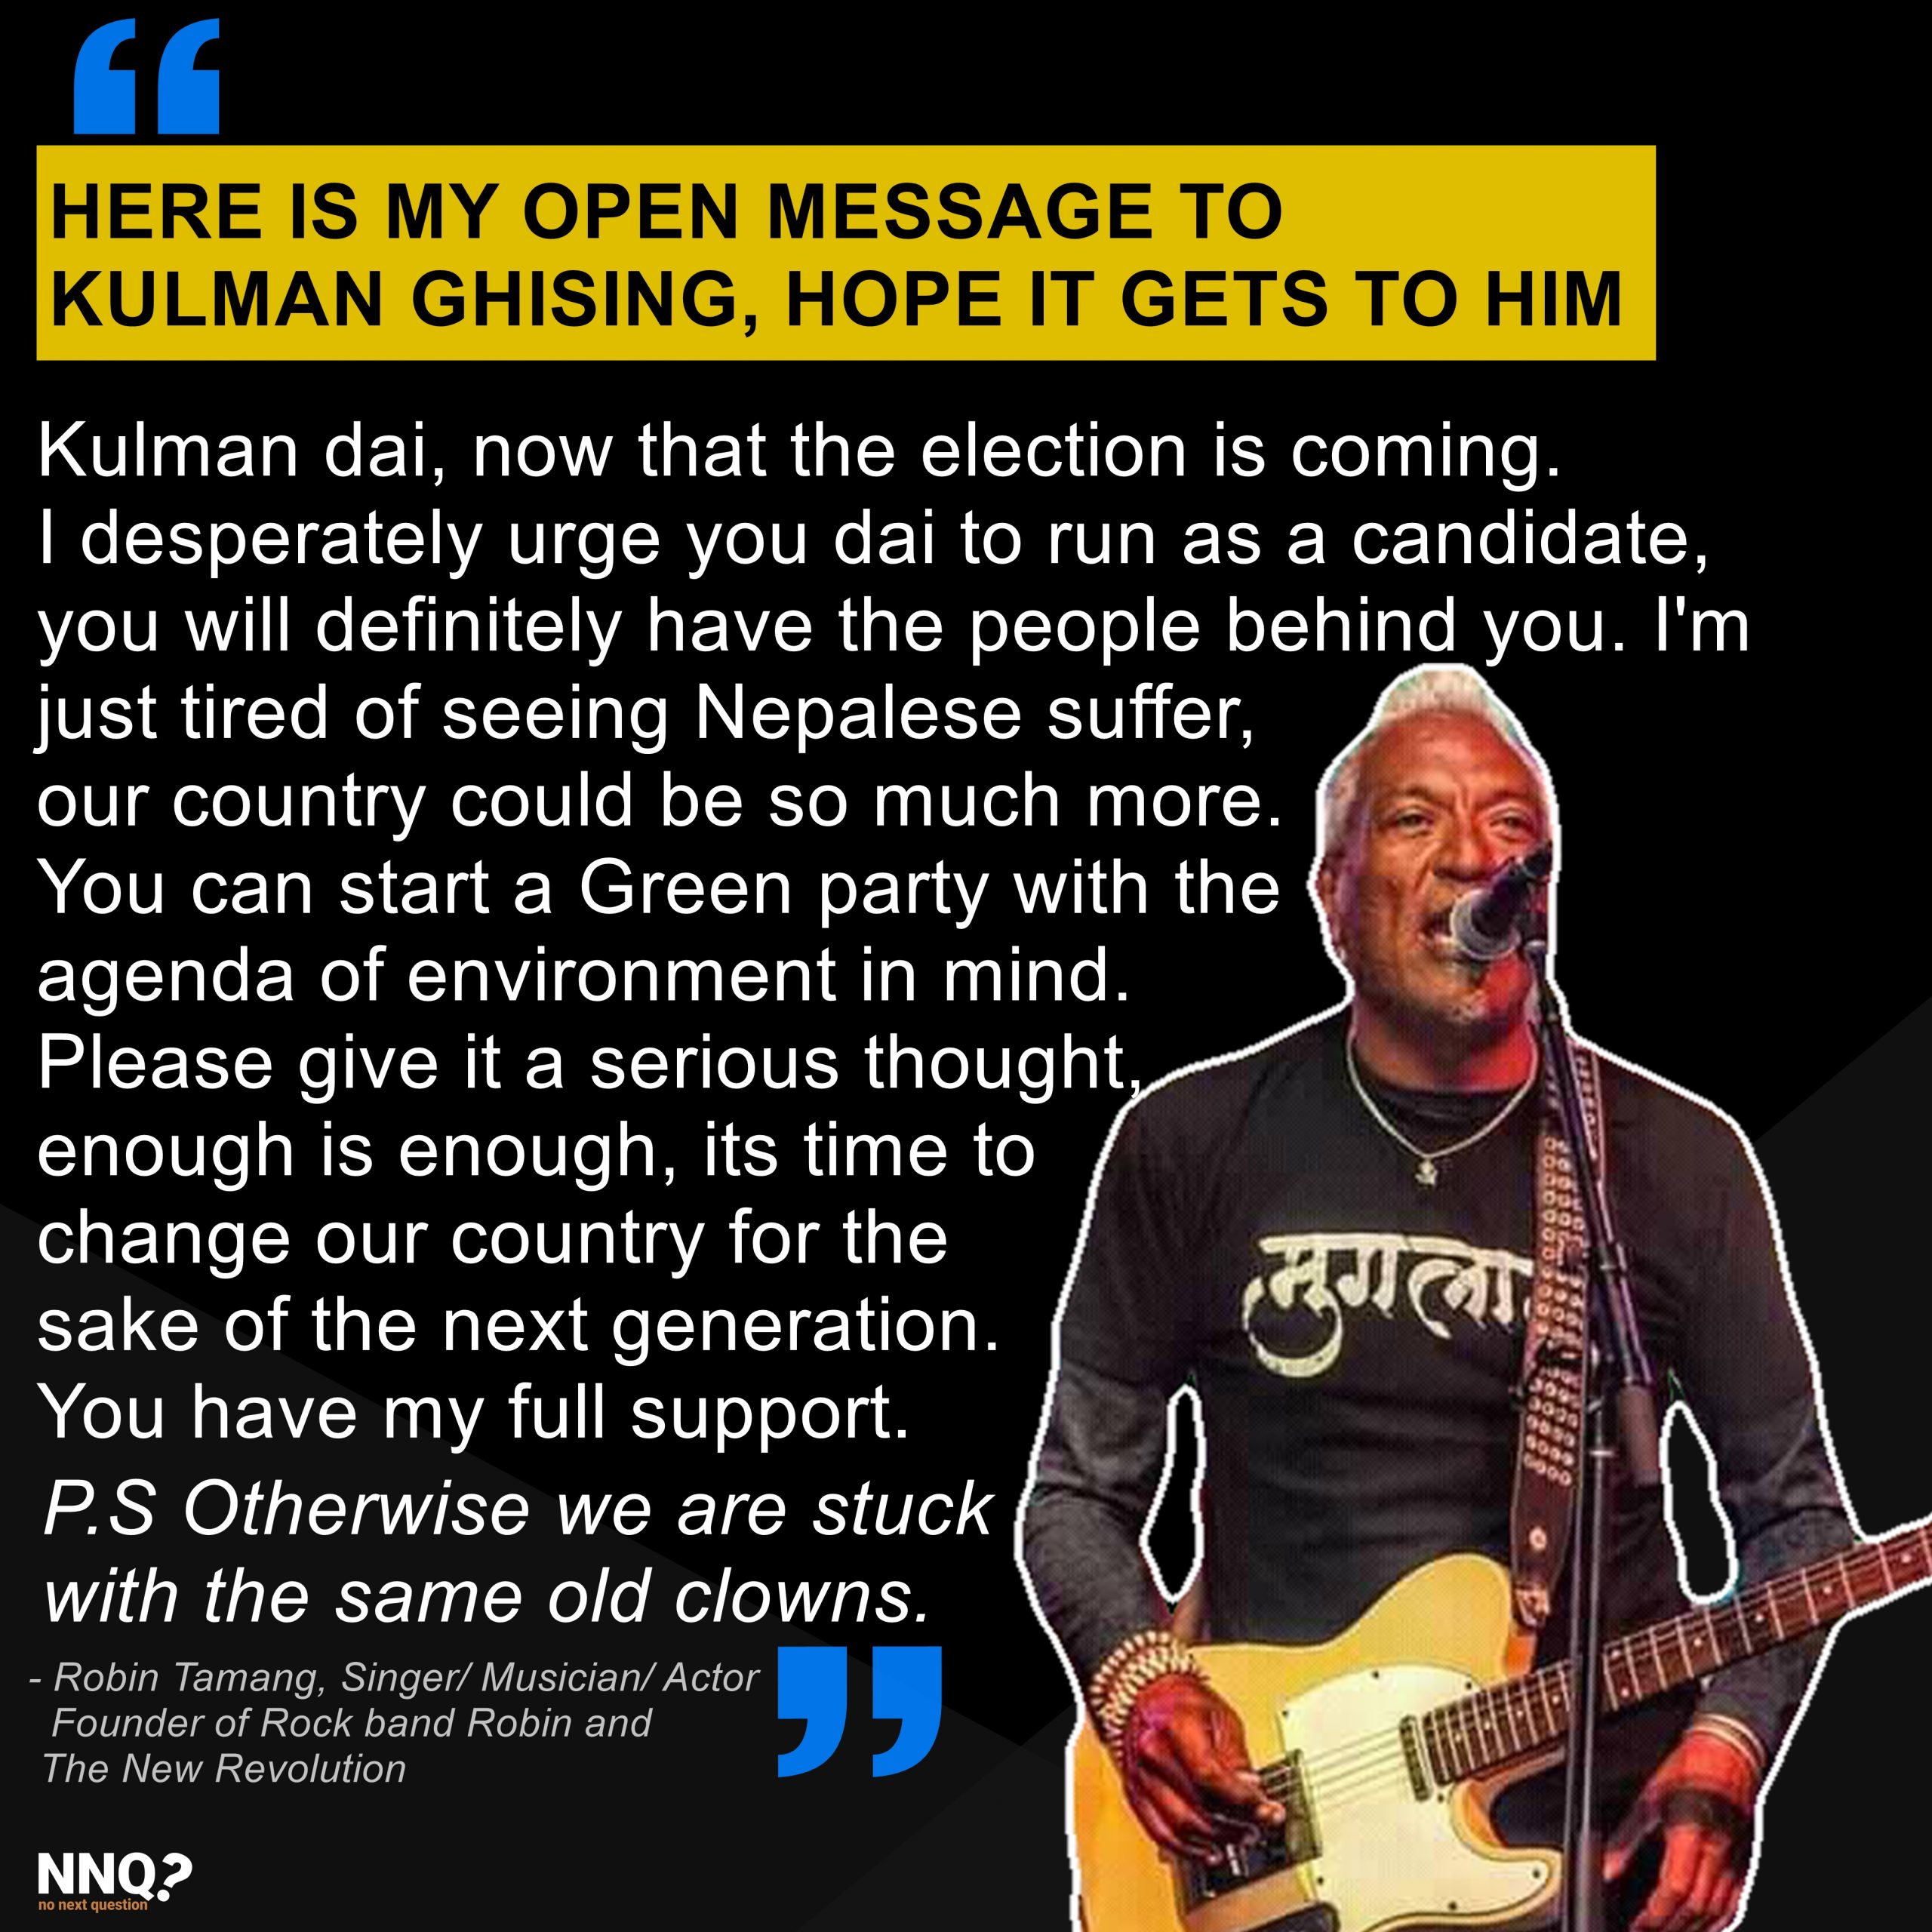 A Request to Kulman Ghising by Rockstar Robin Tamang